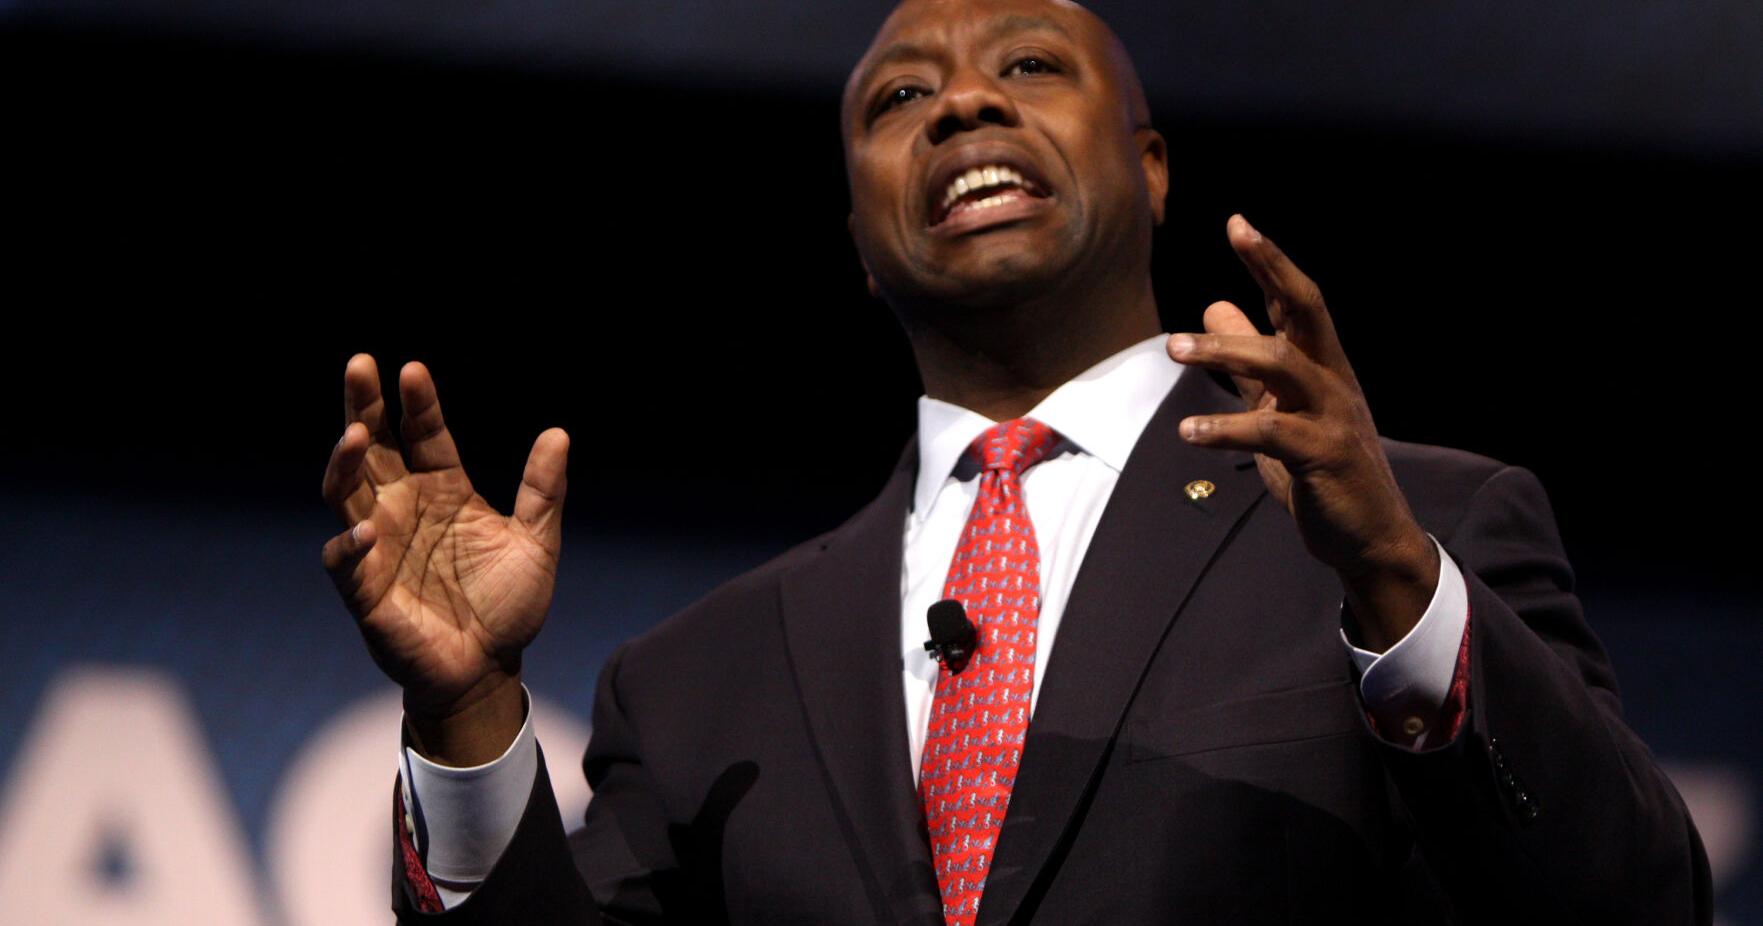 Republican candidates of color vie for the Black vote